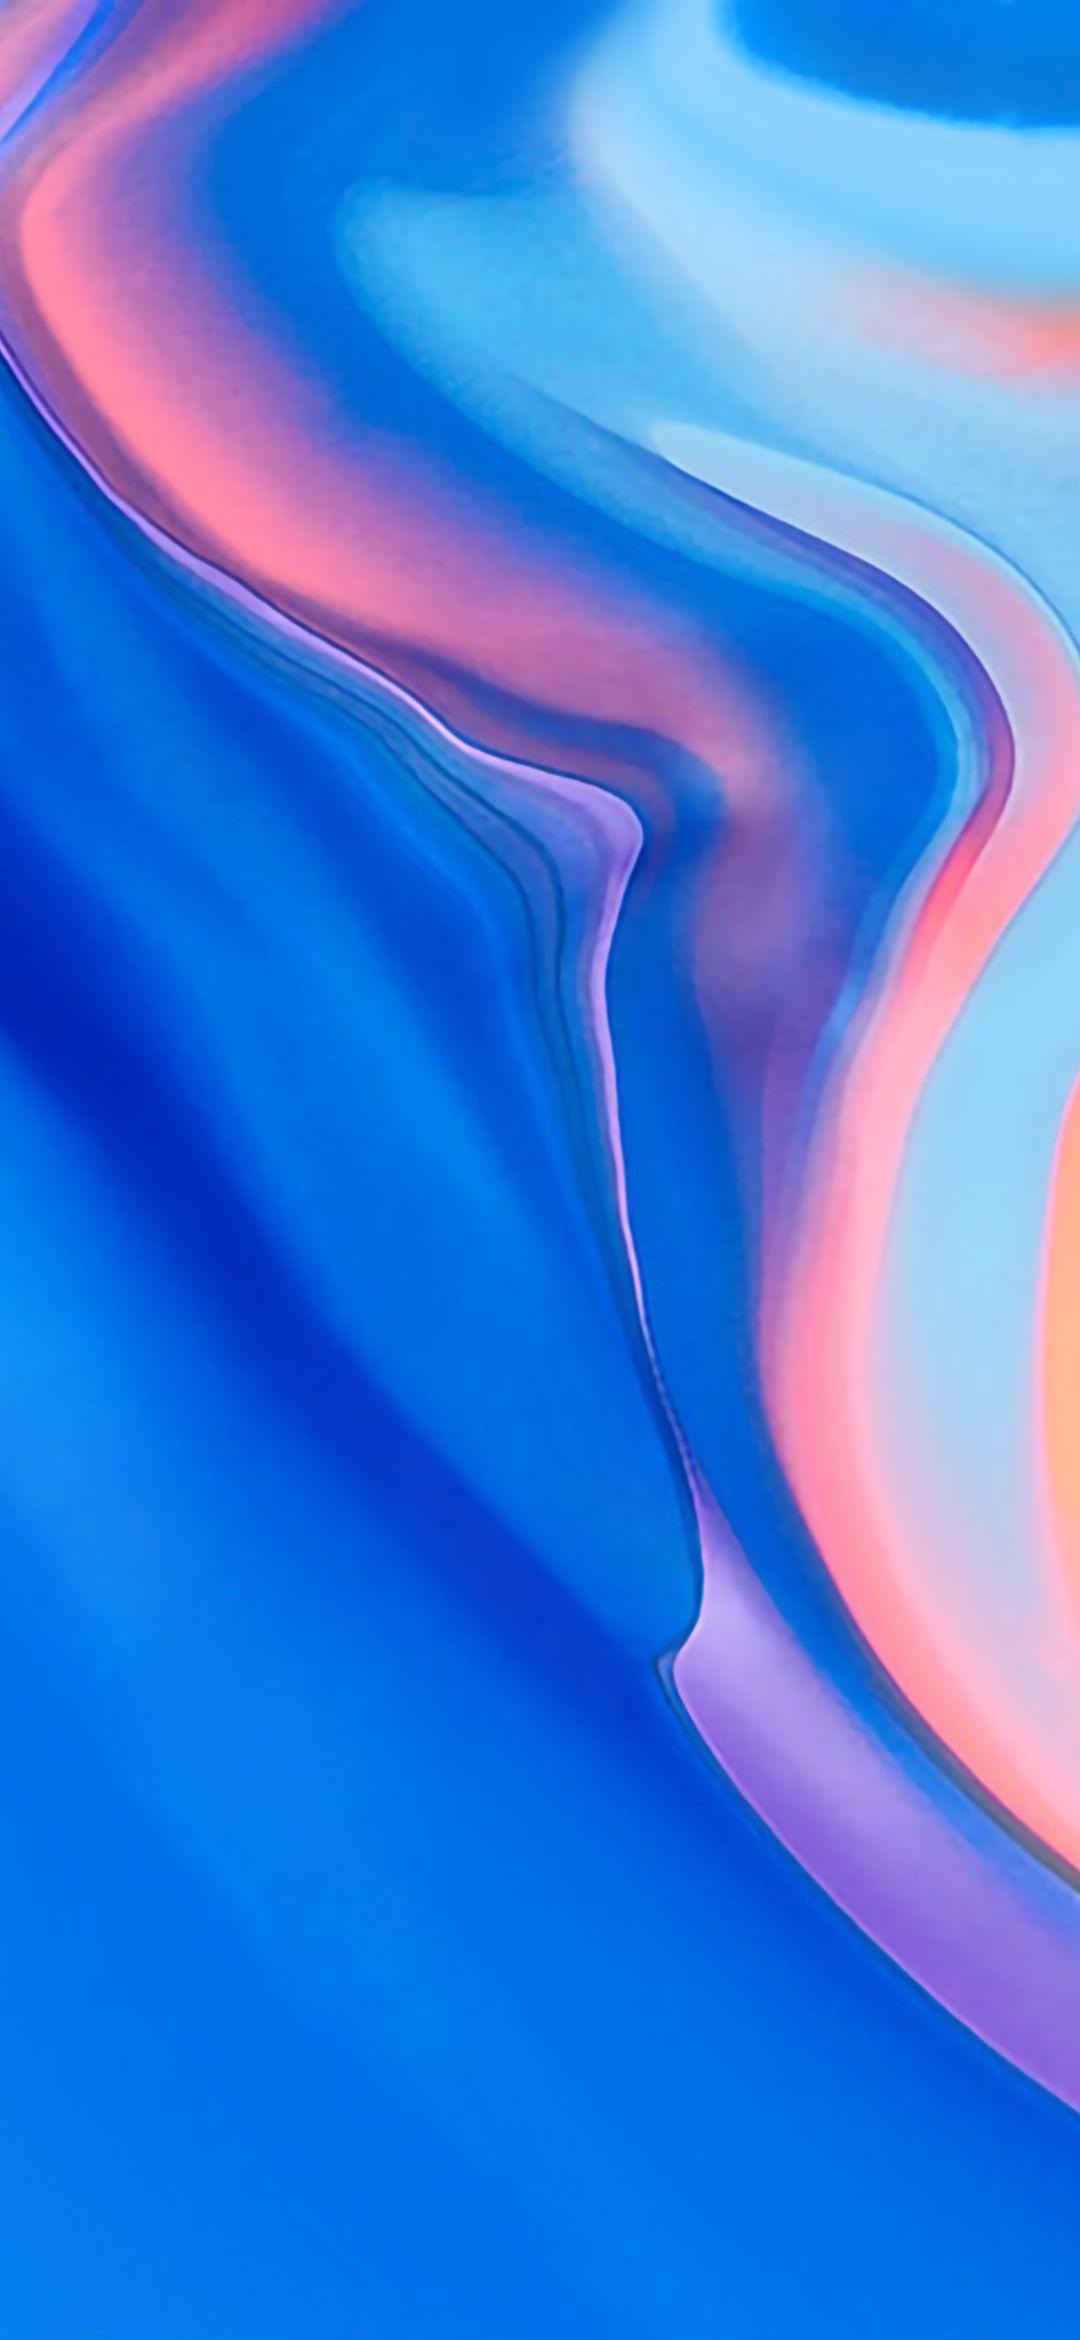 Download Huawei Y9 Prime 2019 Official Wallpaper Here! Full